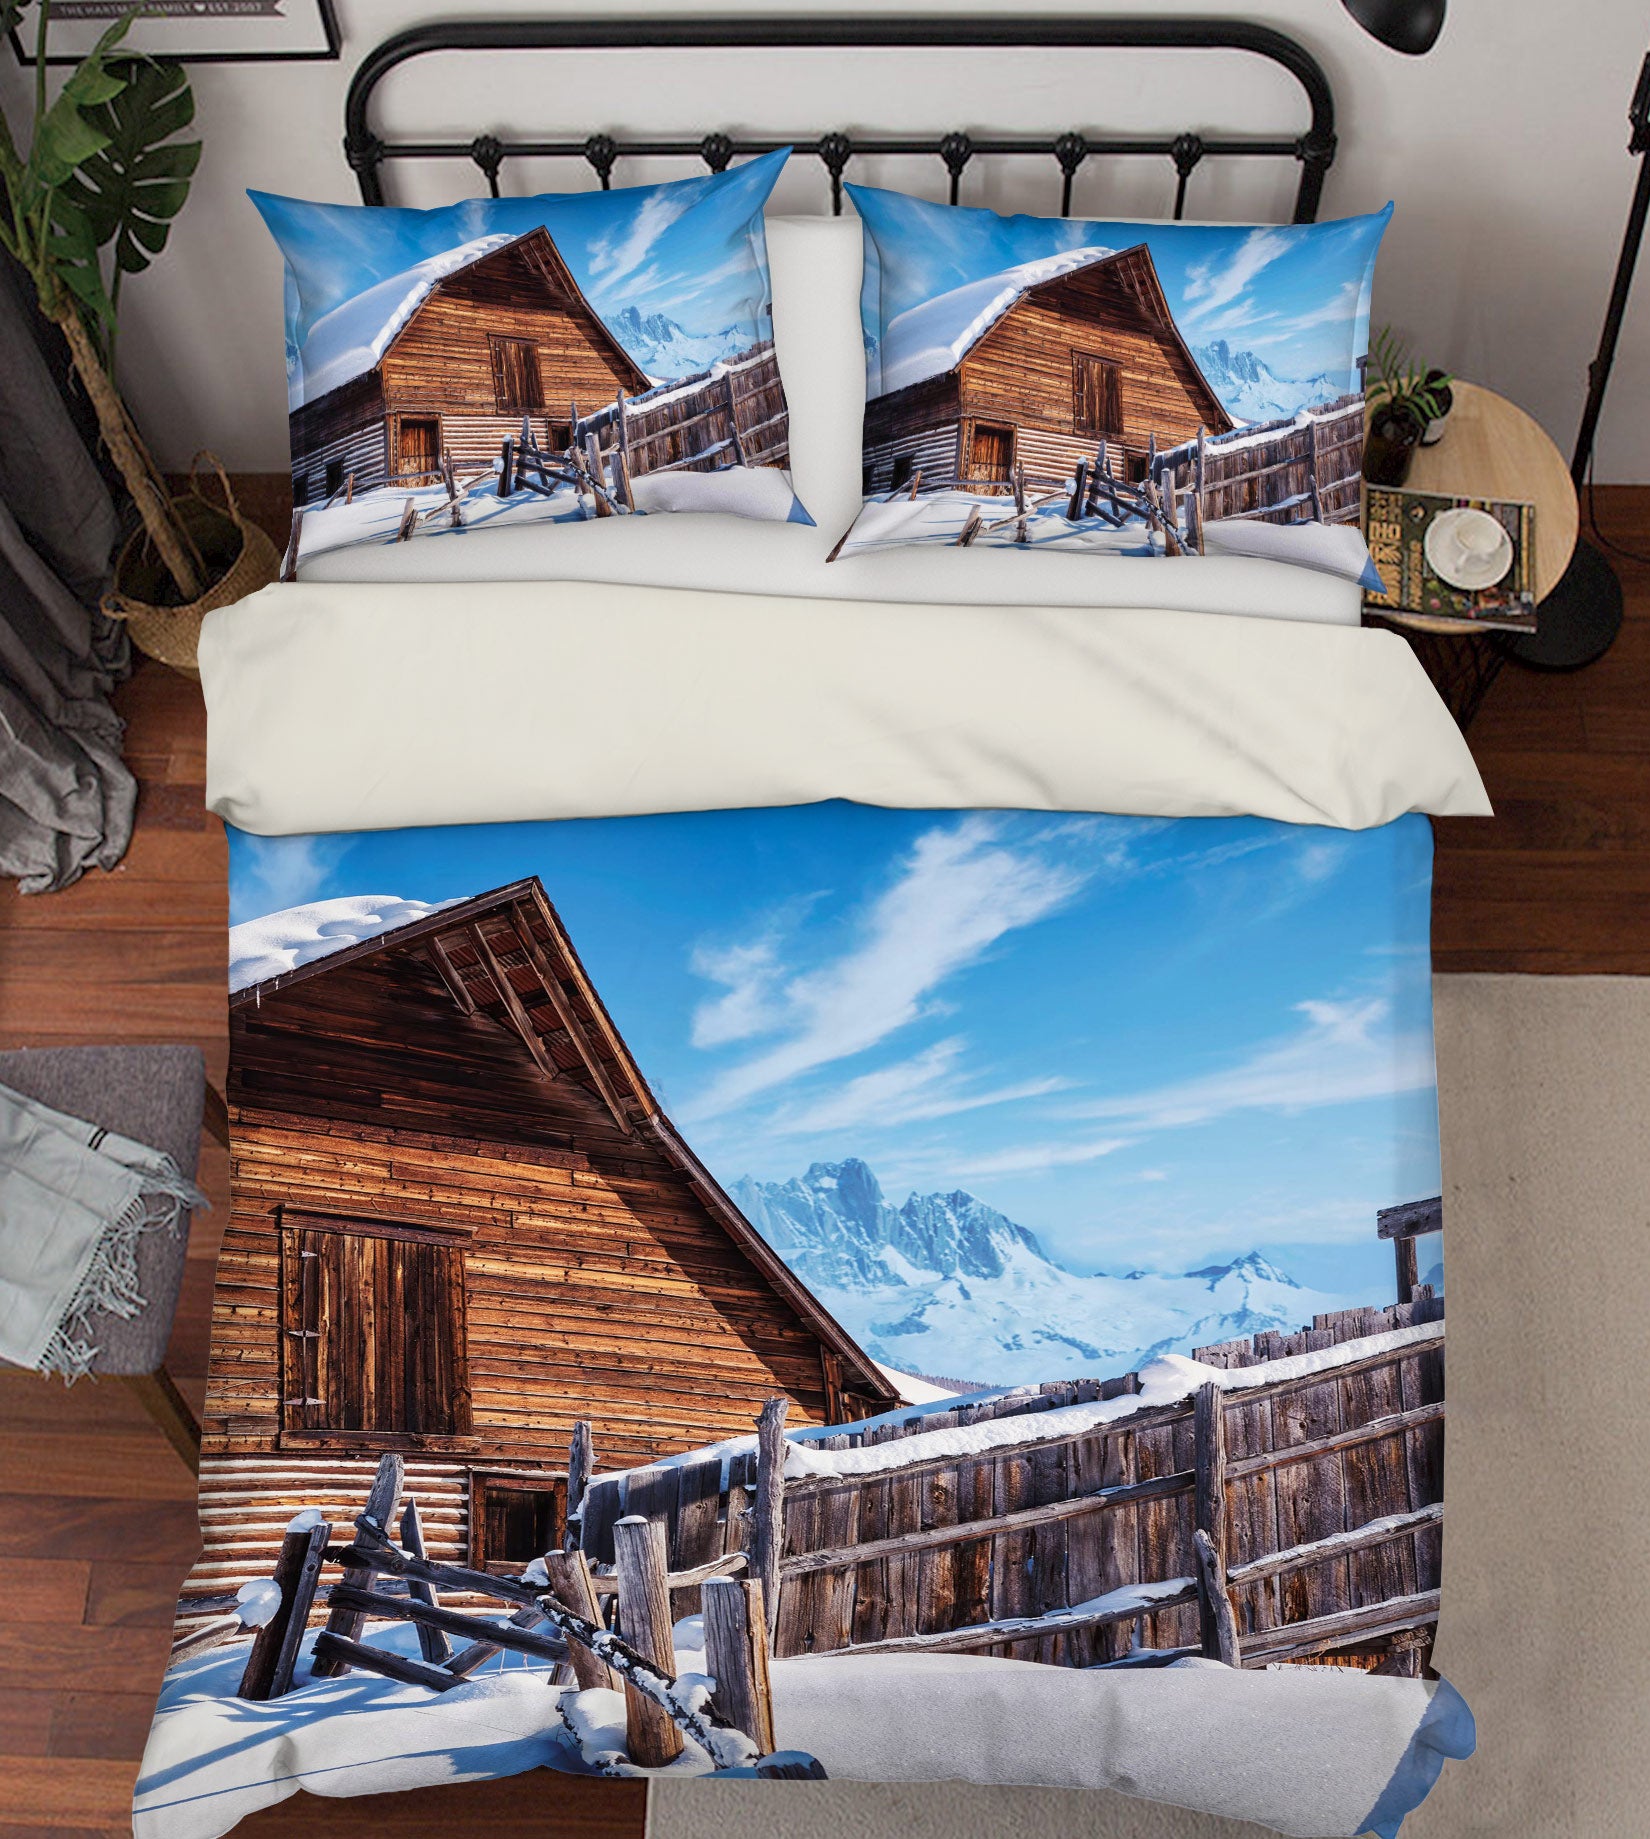 3D Snow Chalet Wooden Fence 8579 Beth Sheridan Bedding Bed Pillowcases Quilt